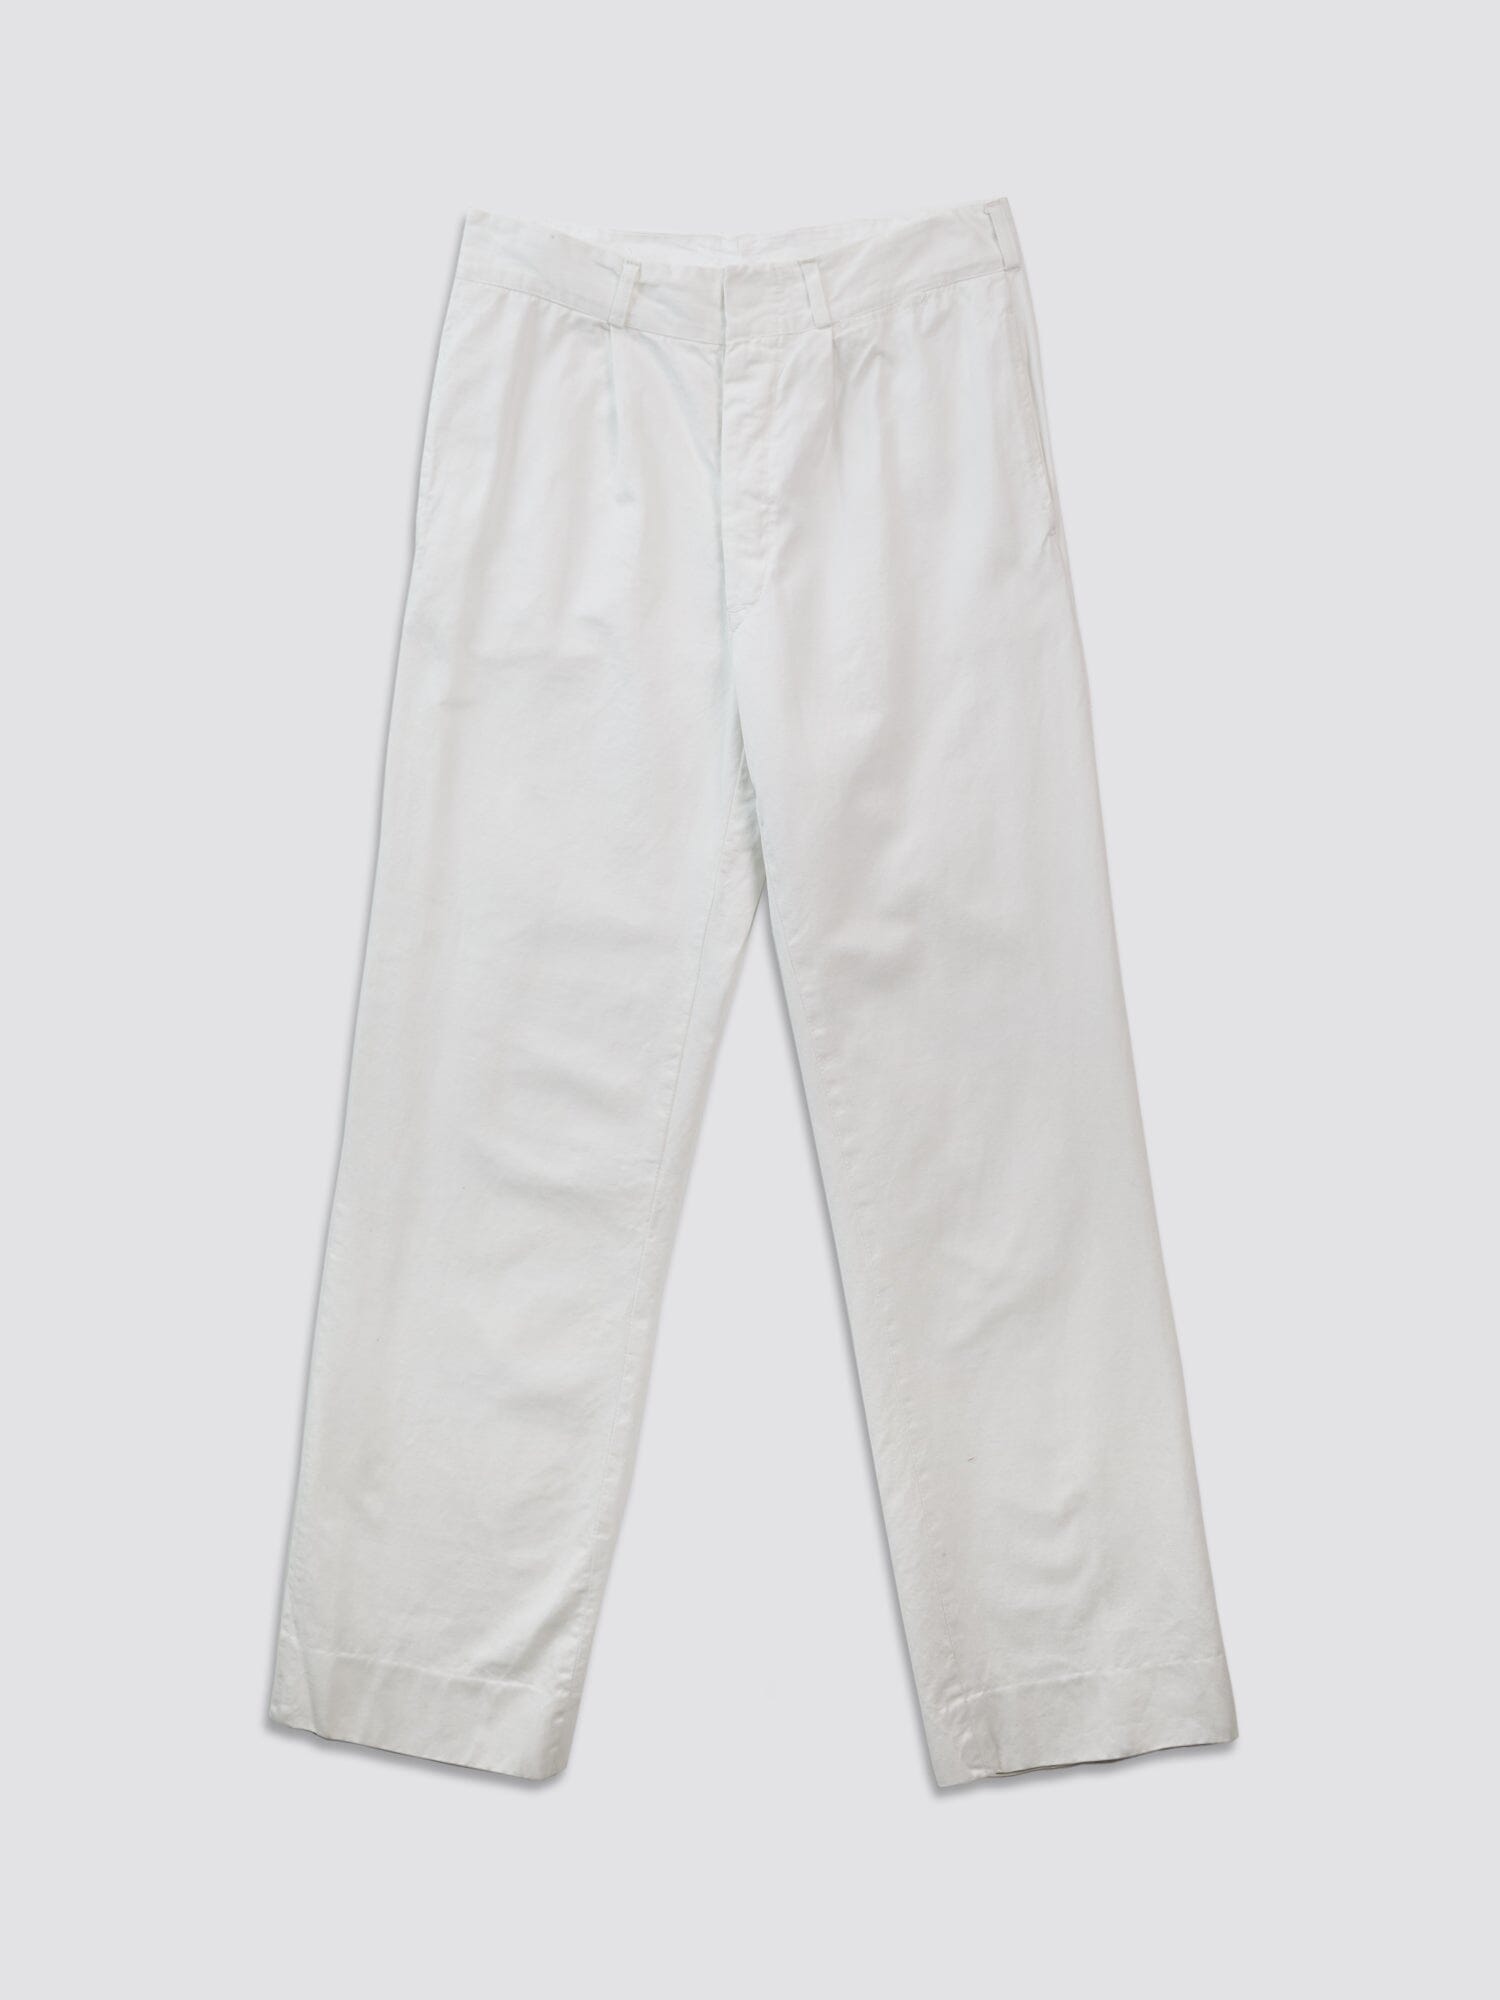 ITALIAN NAVY SAILOR TROUSERS RESUPPLY Alpha Industries WHITE 32 